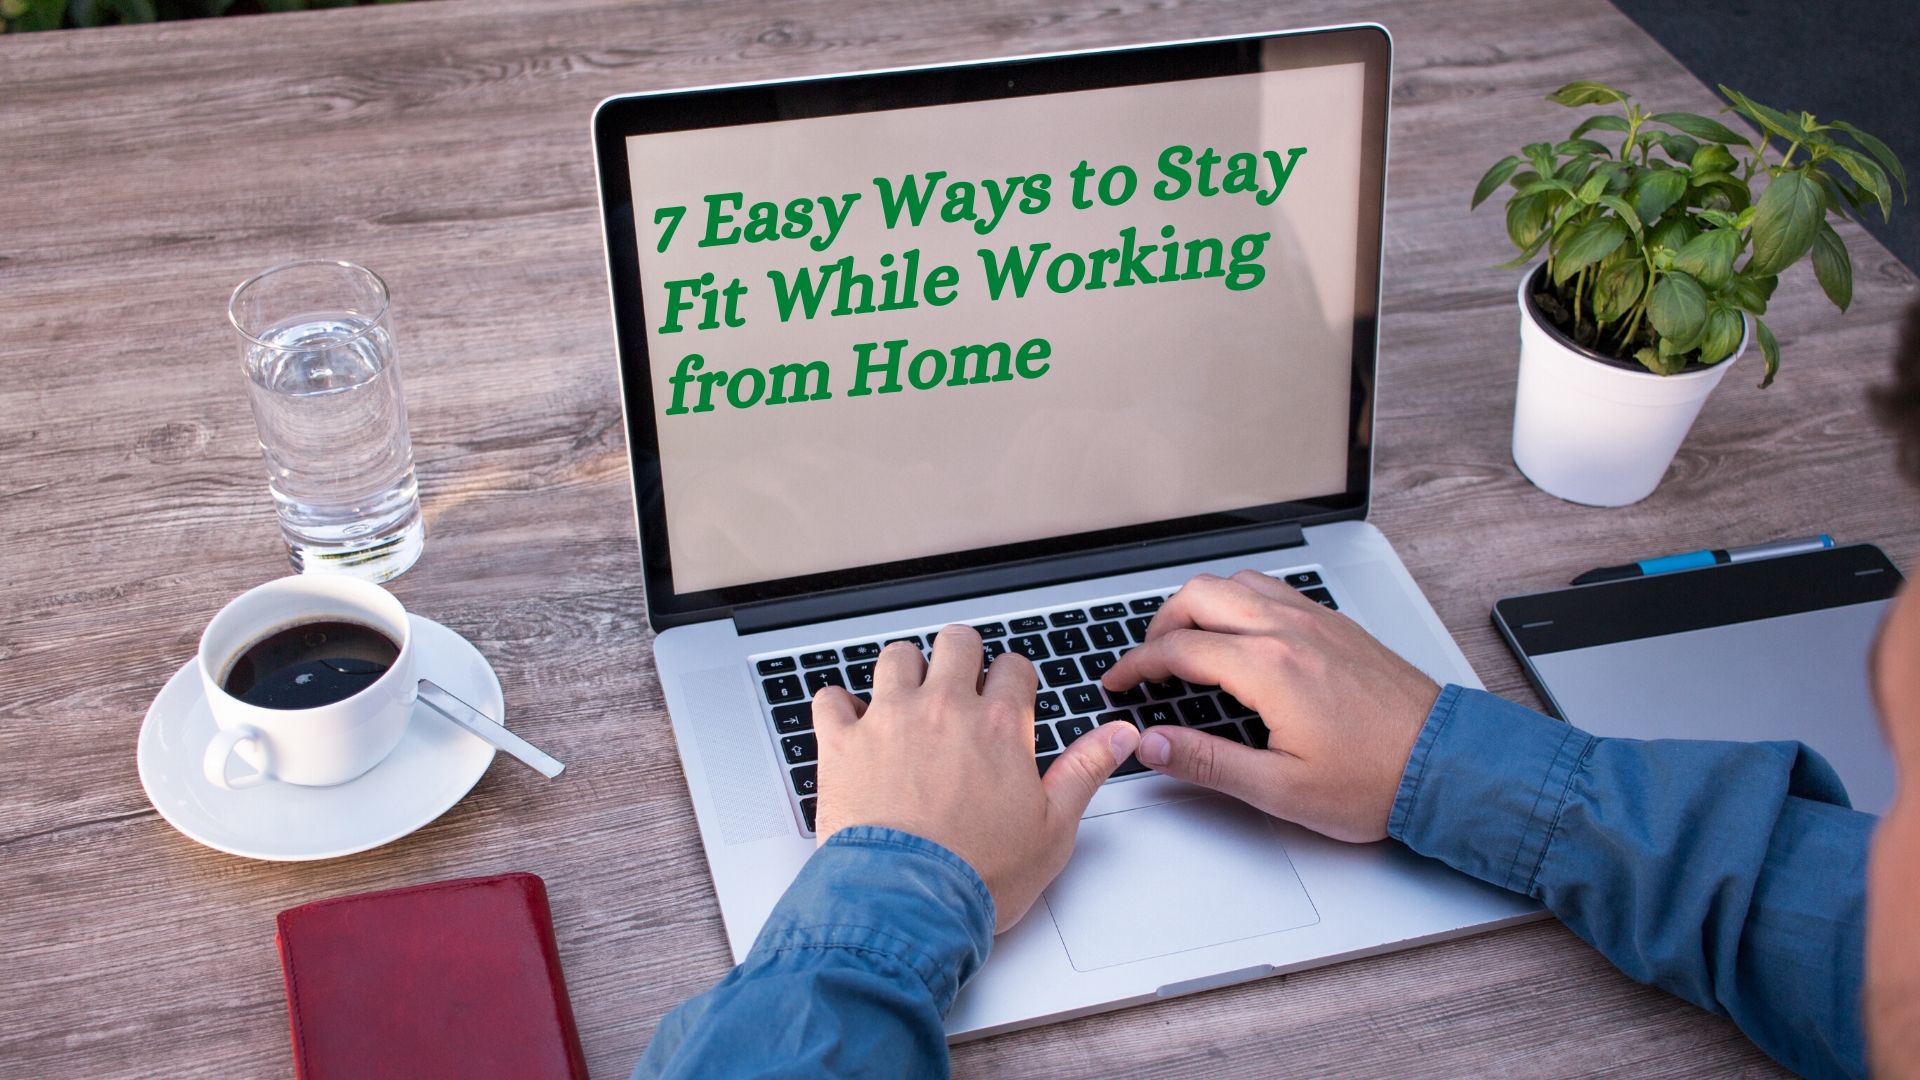 7 Easy Ways to Stay Fit While Working from Home